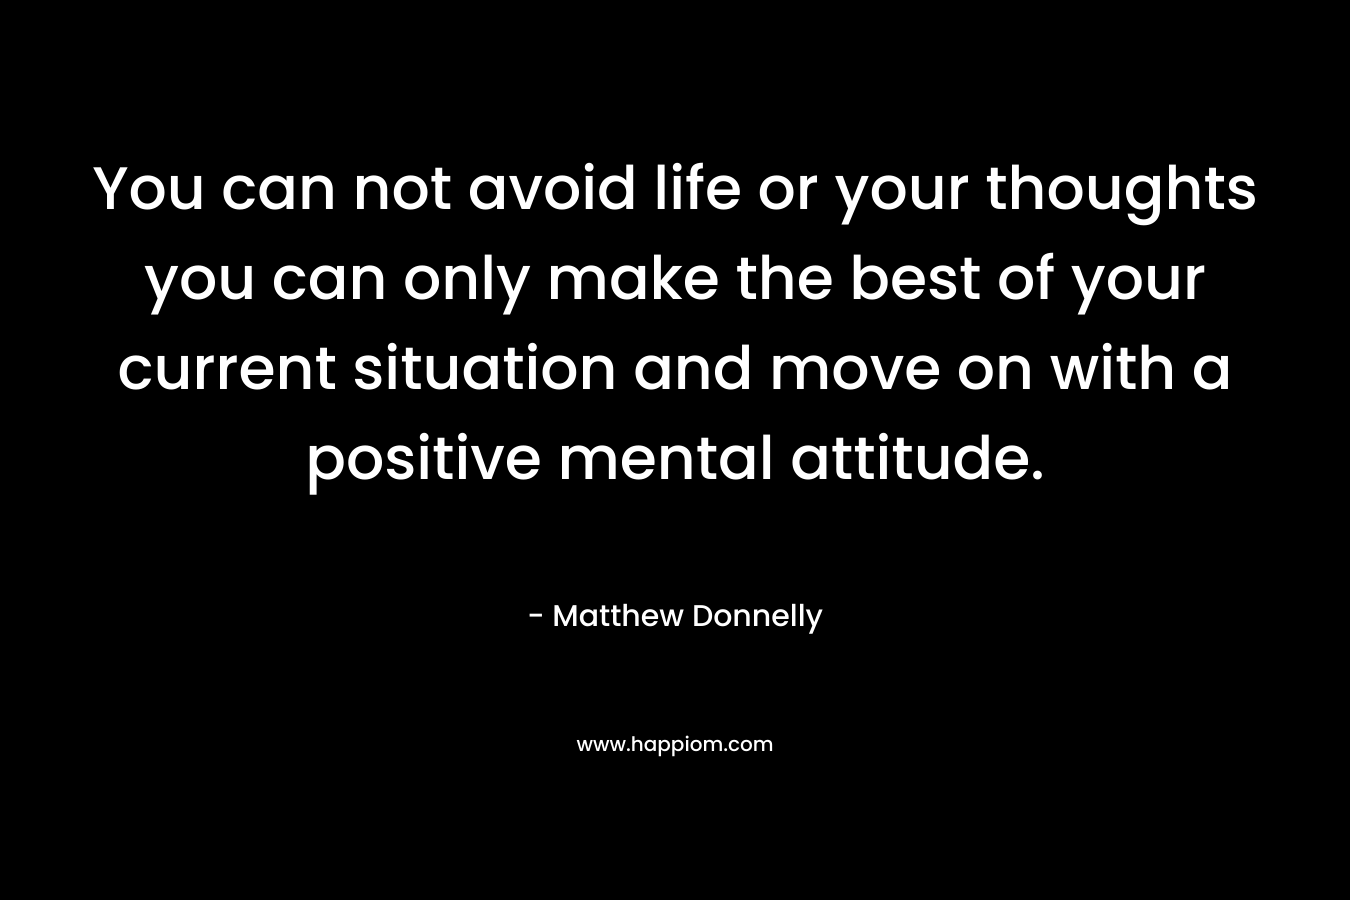 You can not avoid life or your thoughts you can only make the best of your current situation and move on with a positive mental attitude.